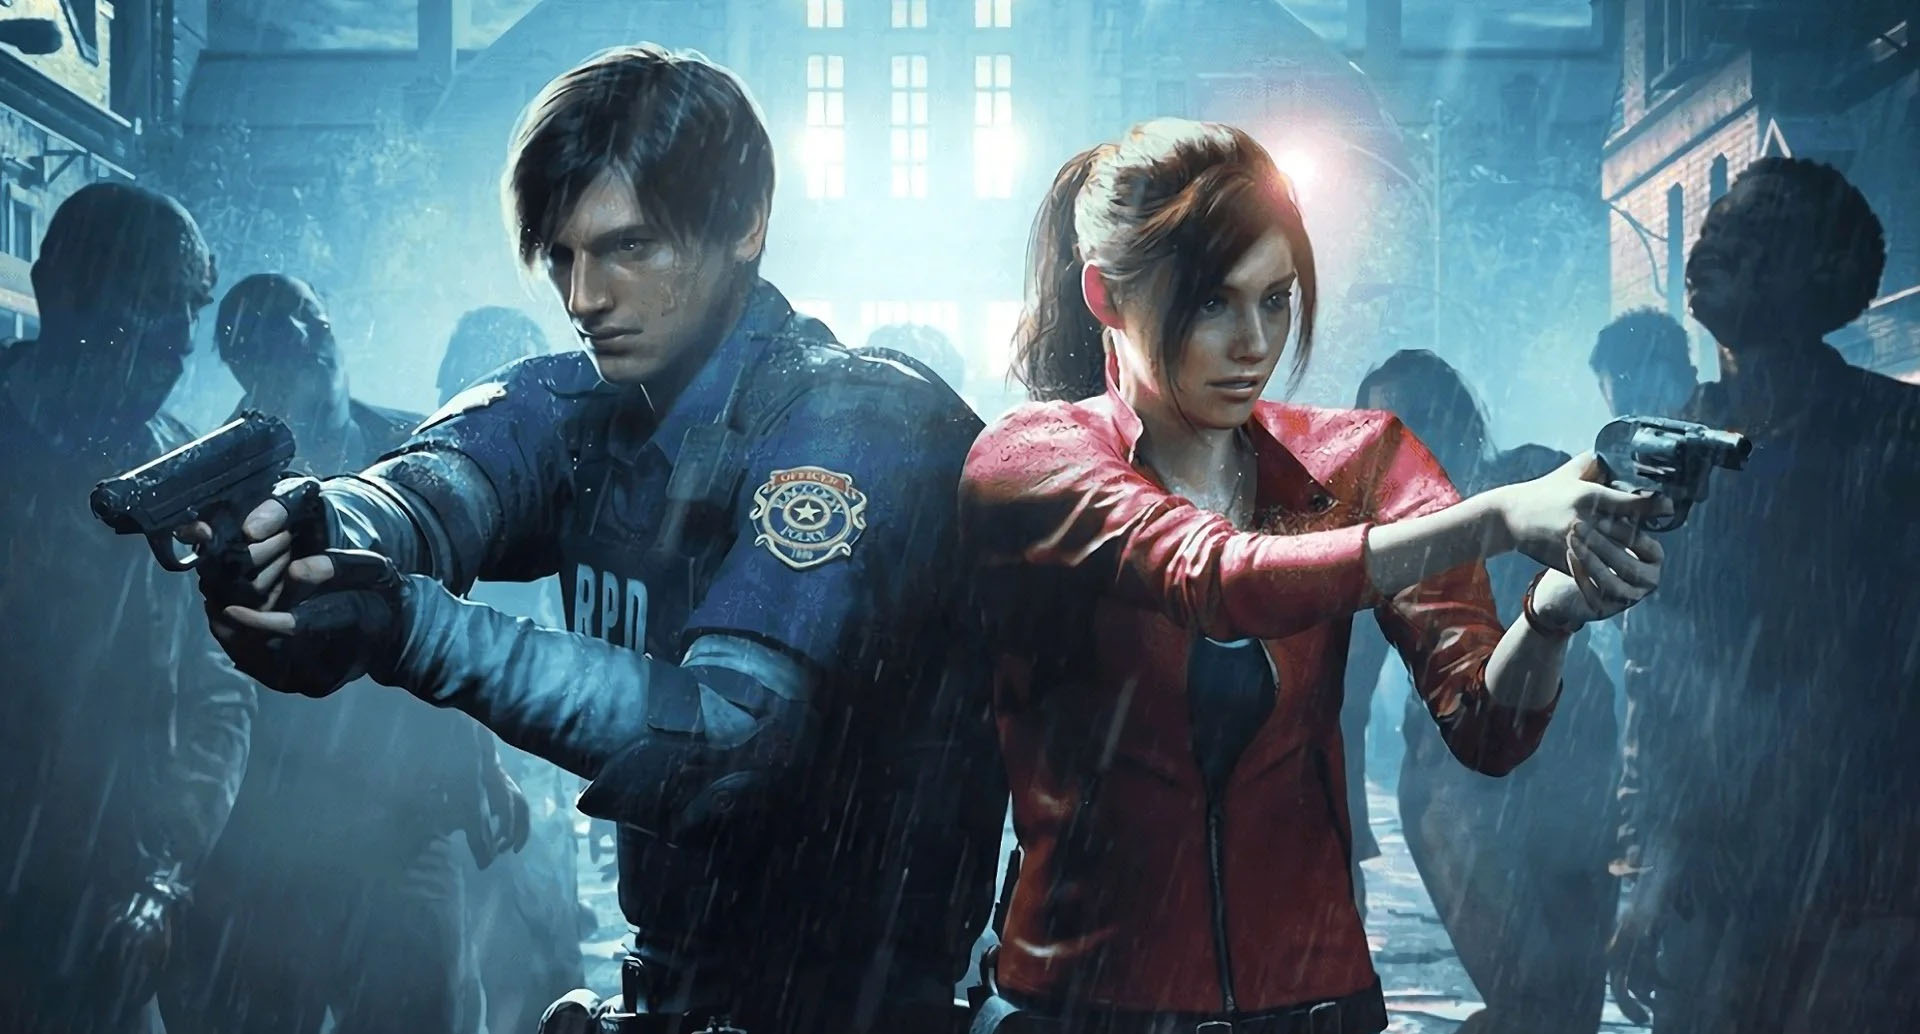  Resident Evil TV series coming to Netflix